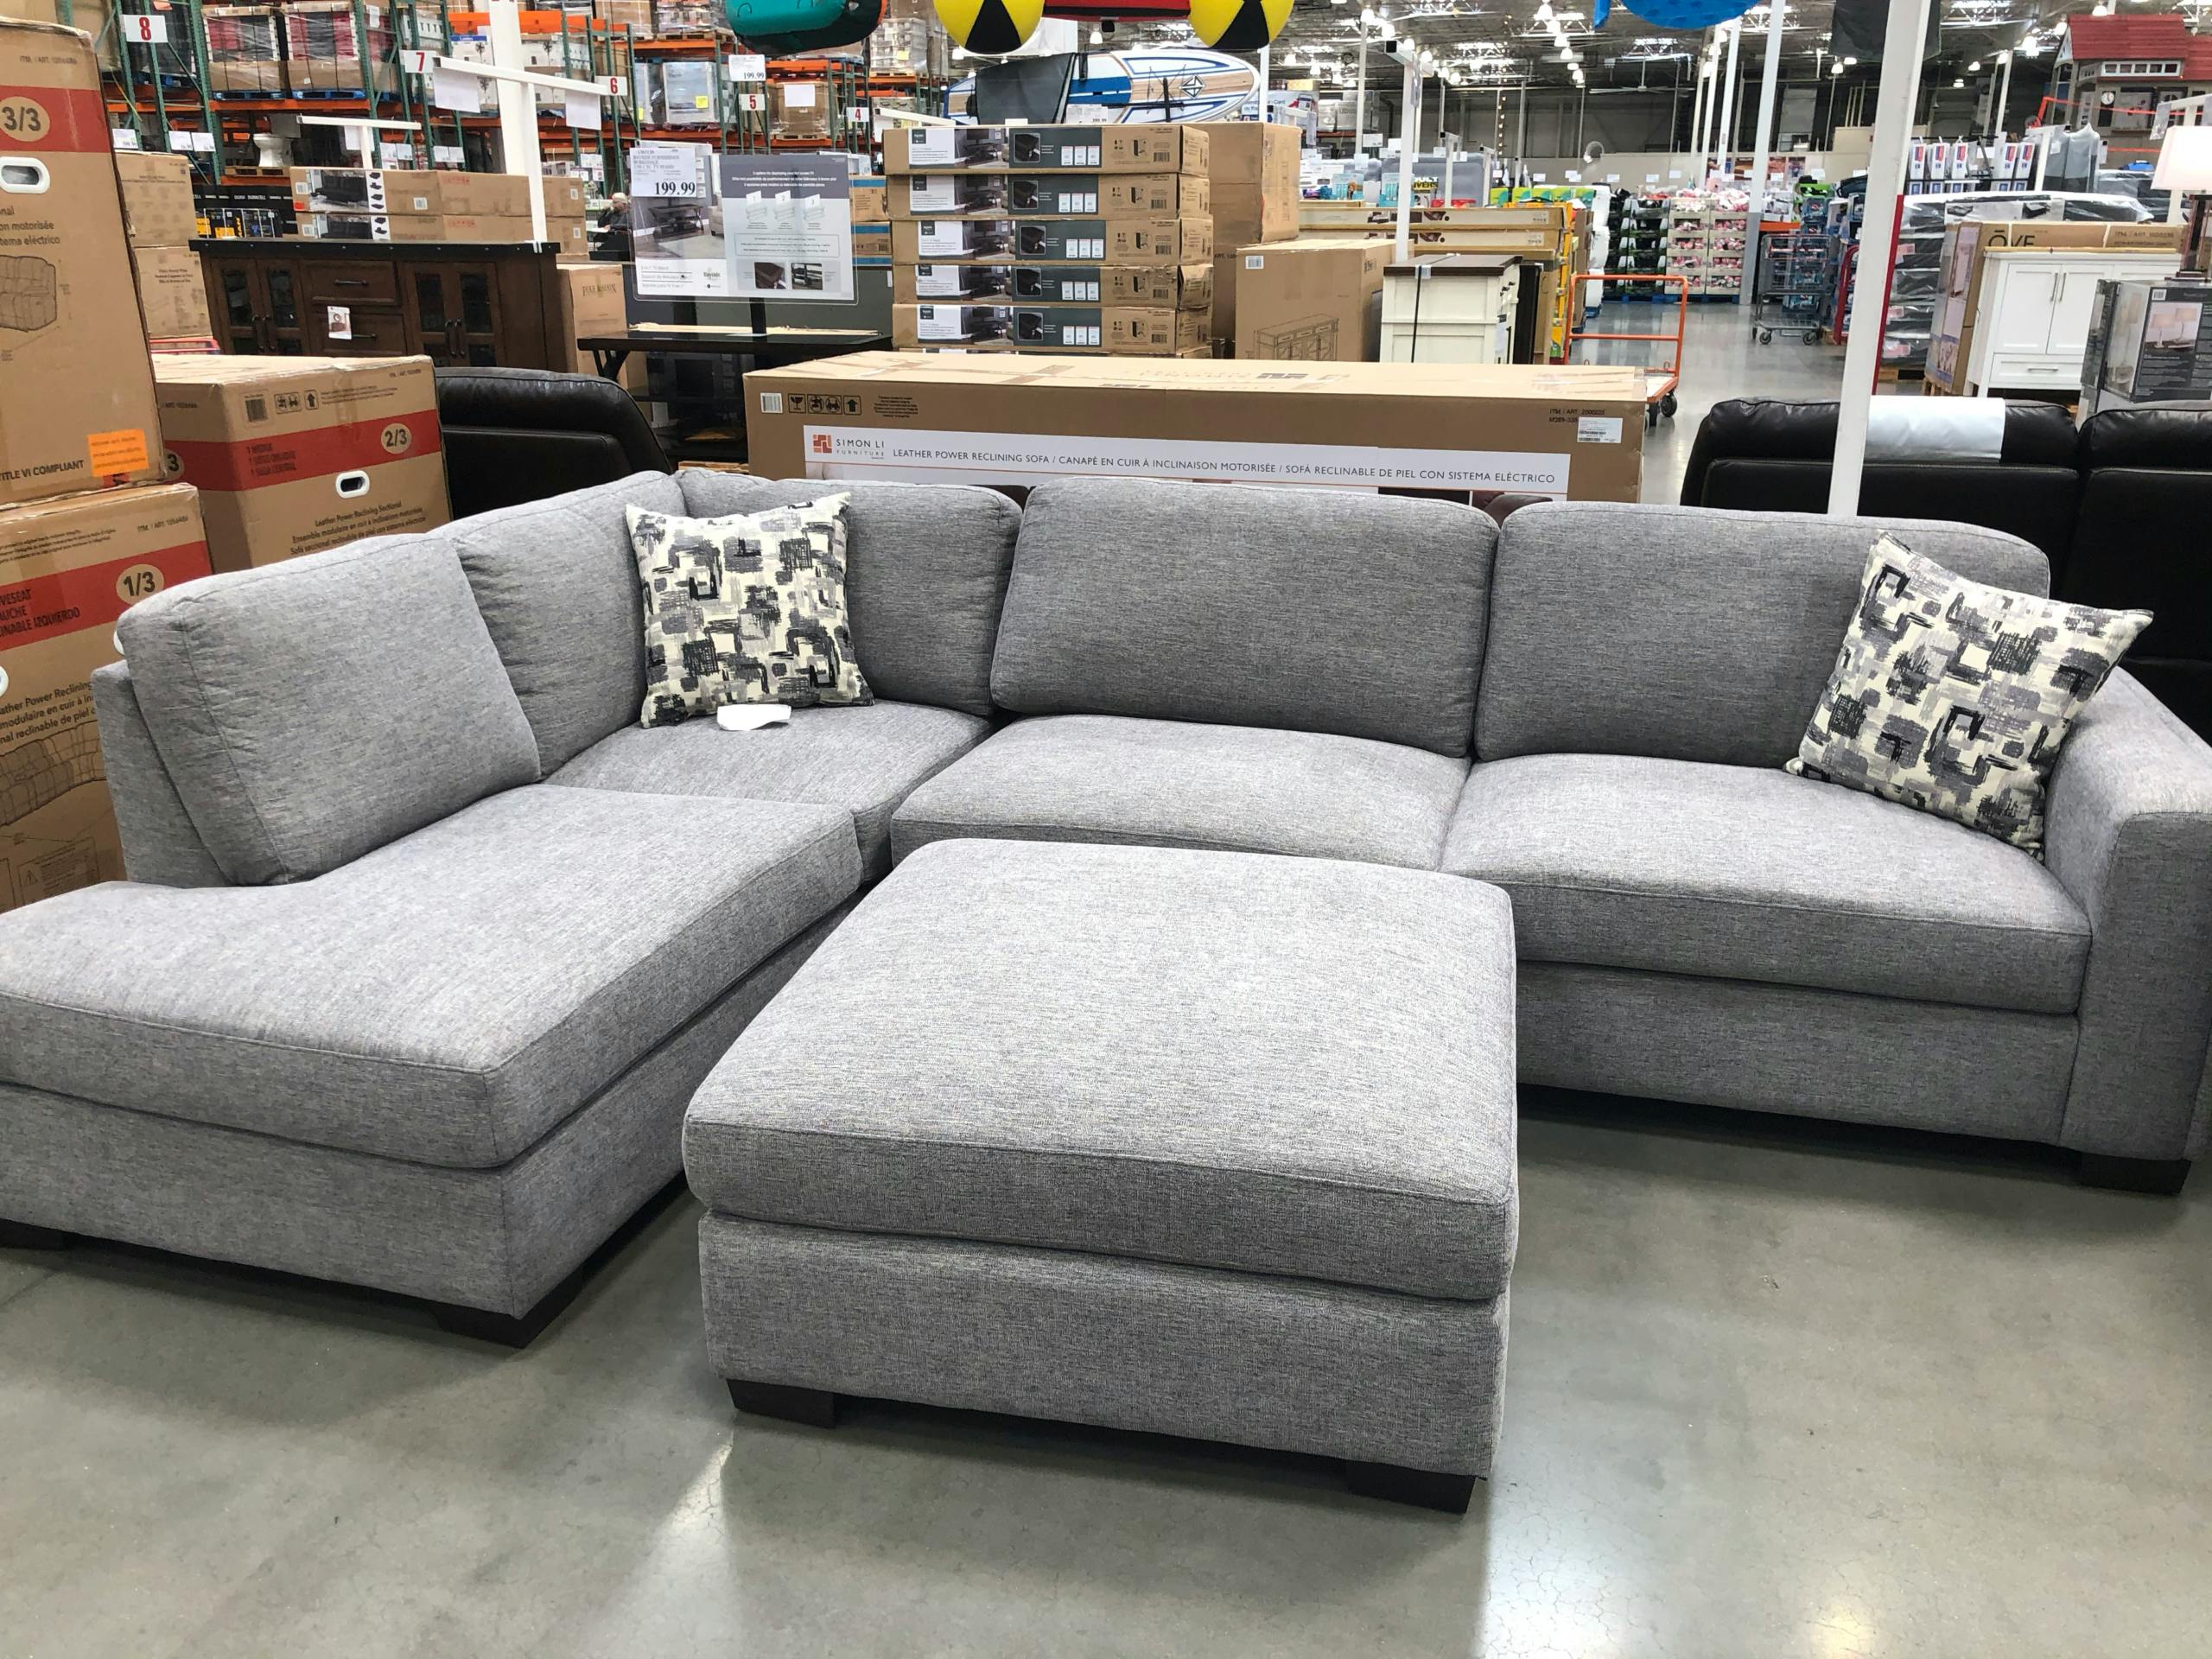 it's furniture month at costco save on couches consoles